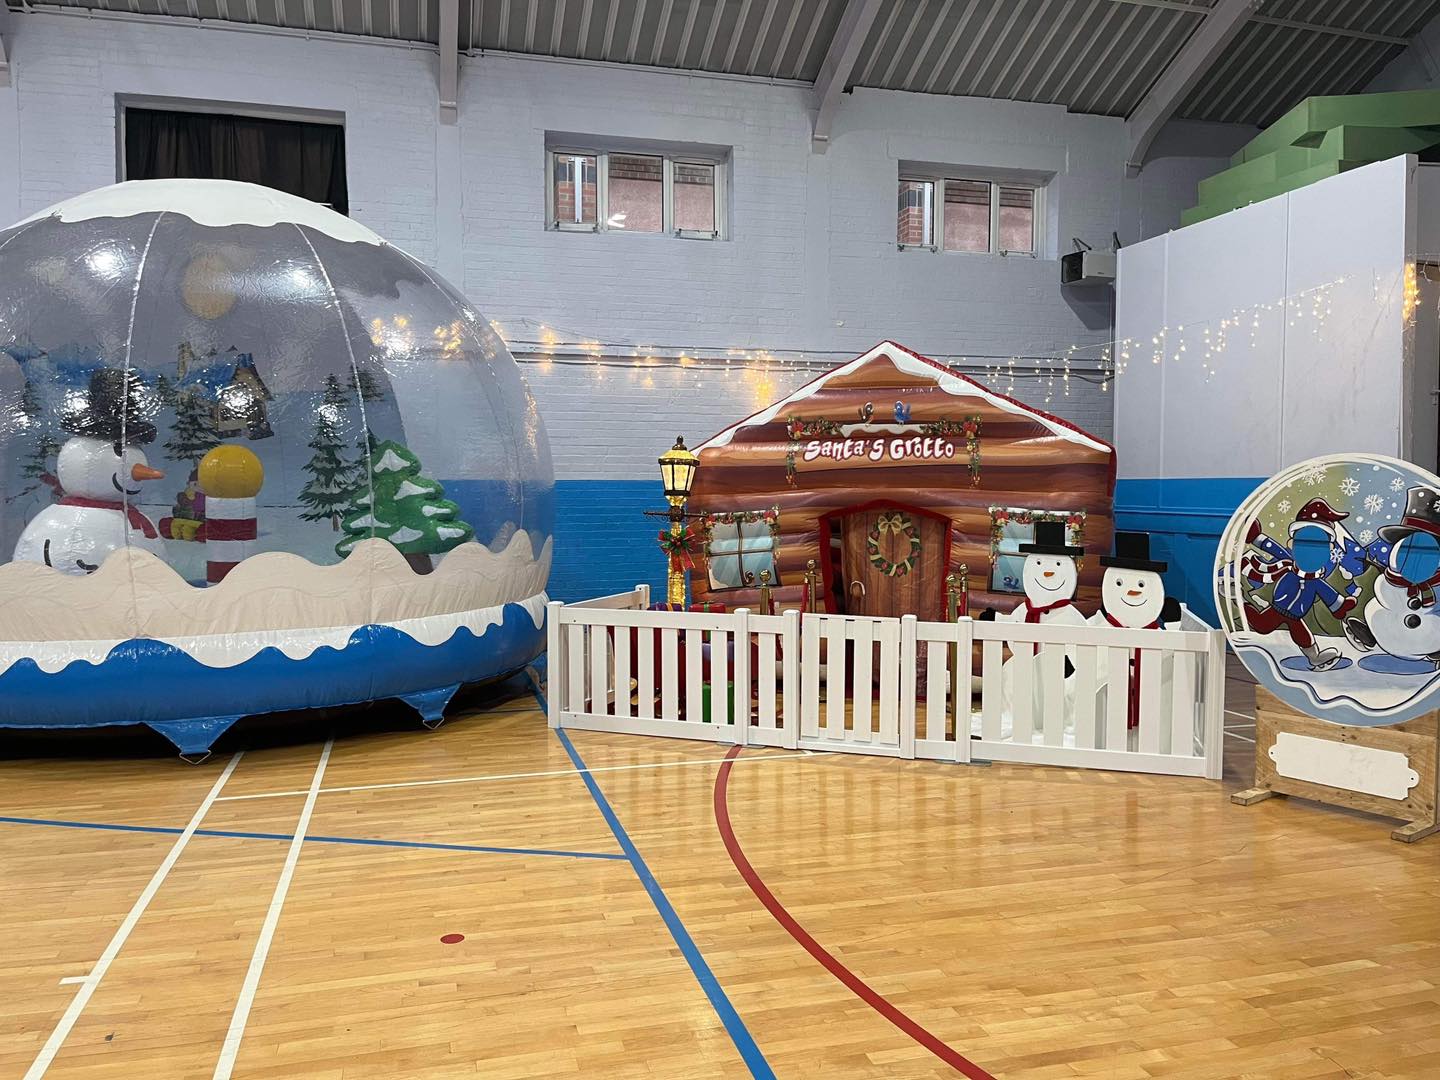 This image shows a Christmas special package on hire from SJ's Leisure in the Wirral including inflatable snow globe and Santa's grotto experience.